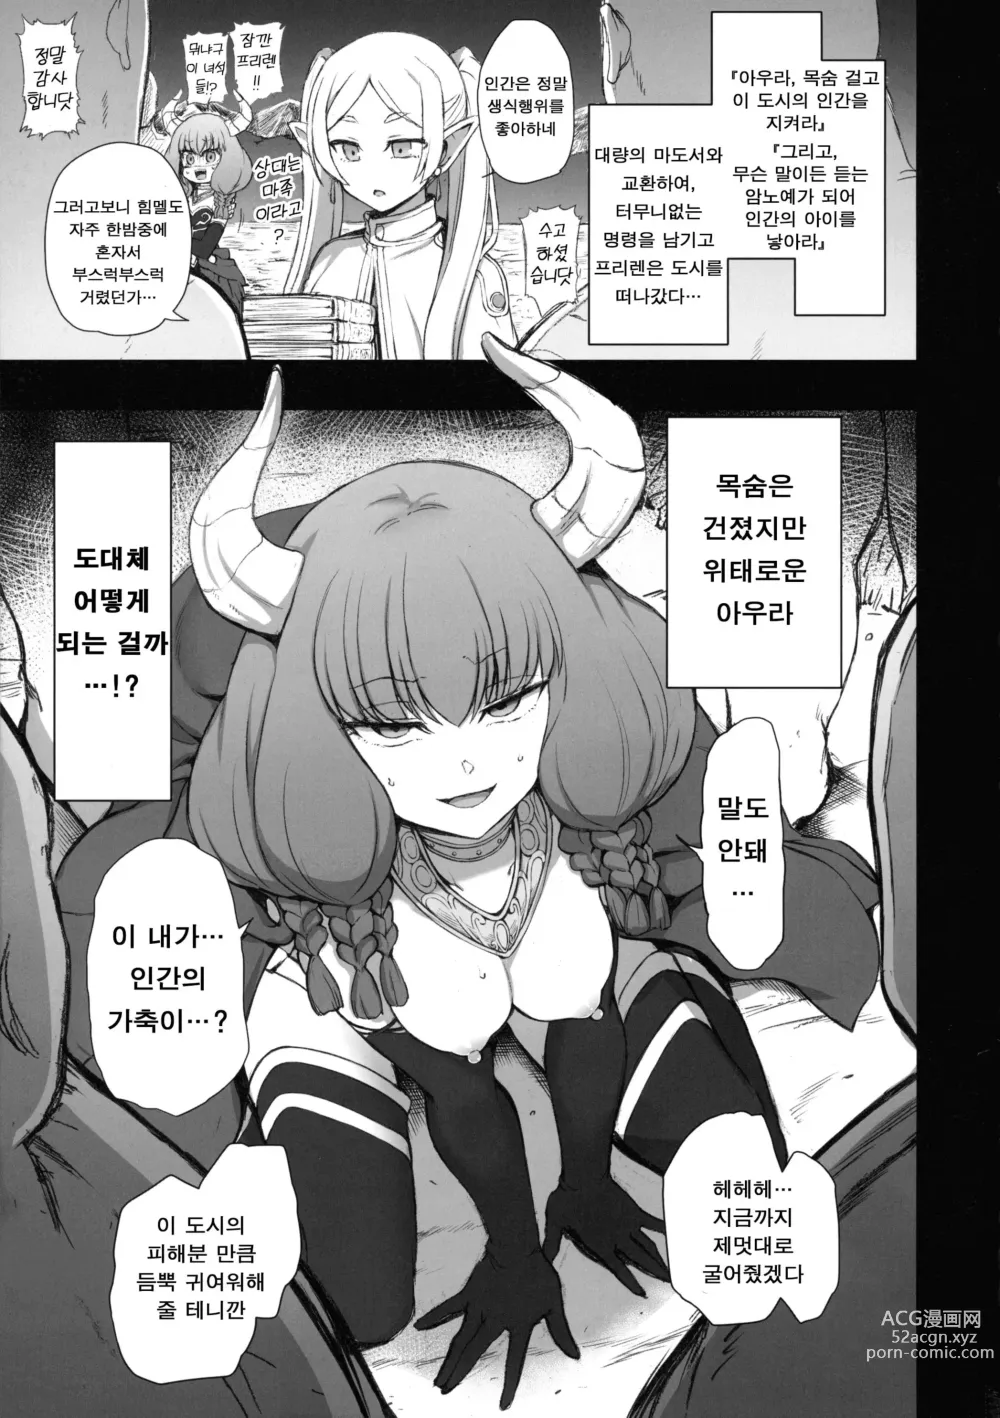 Page 3 of doujinshi 탁음 6